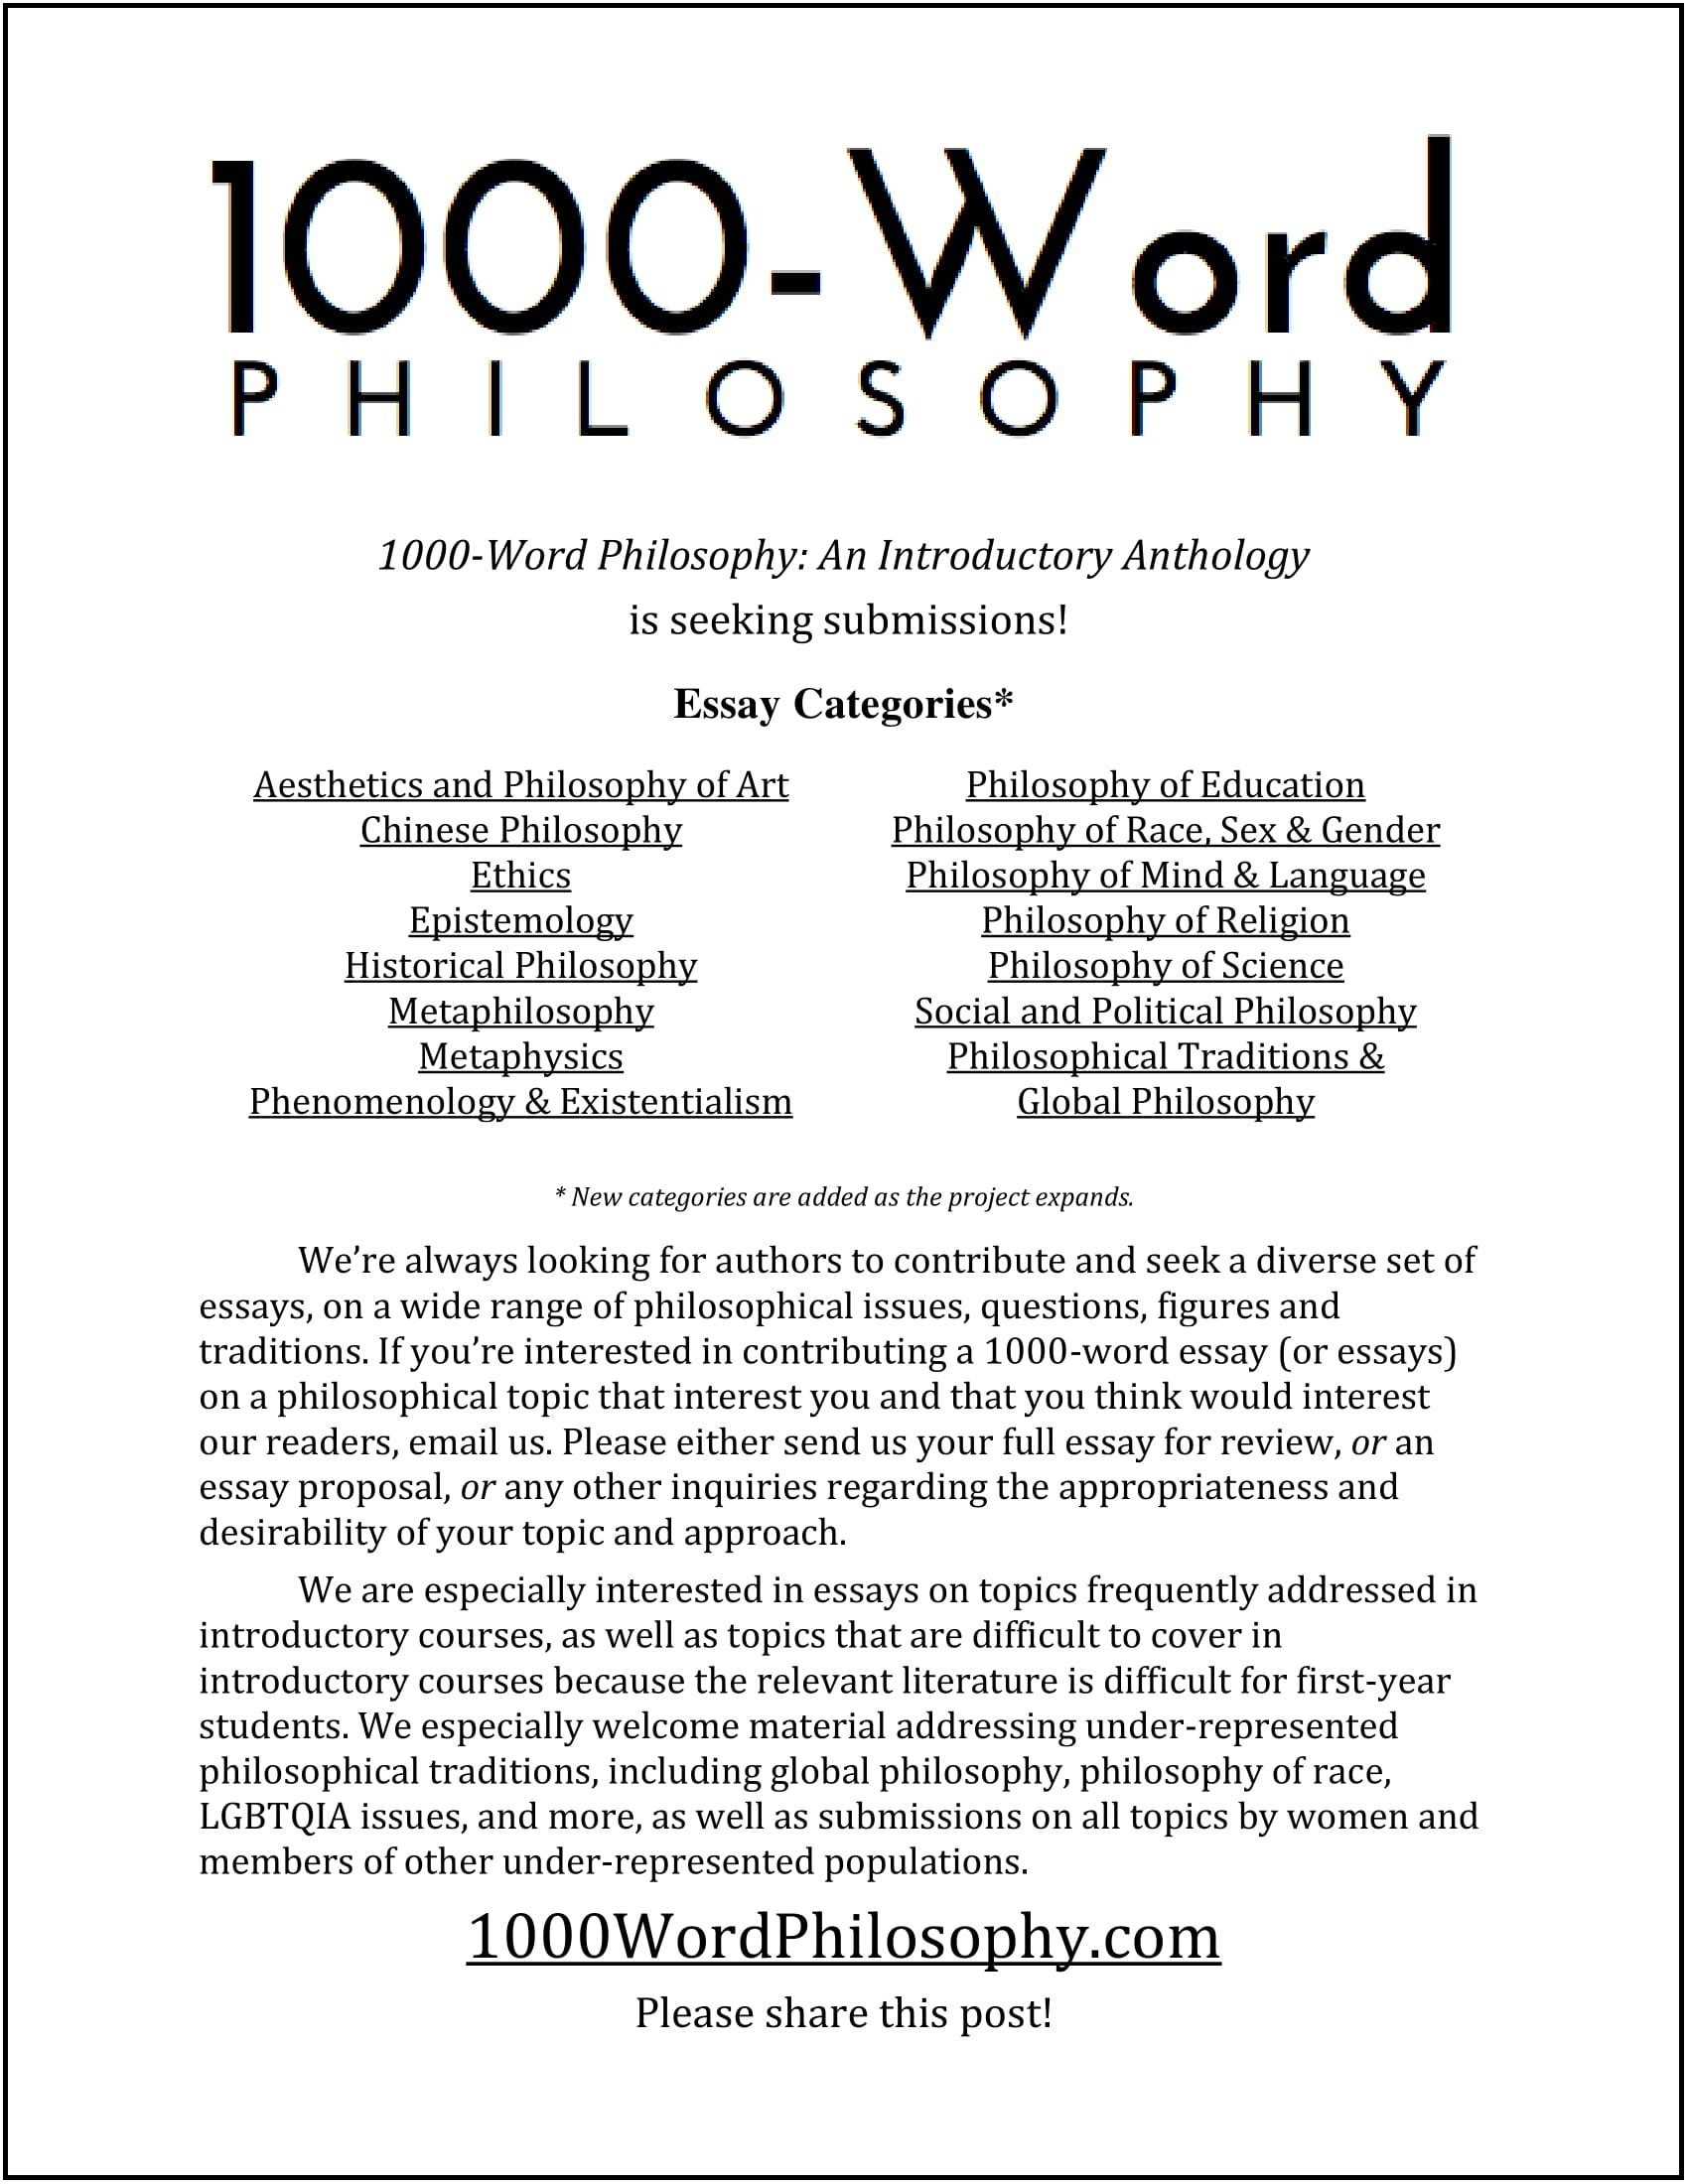 picture of the 1000-word philosophy article